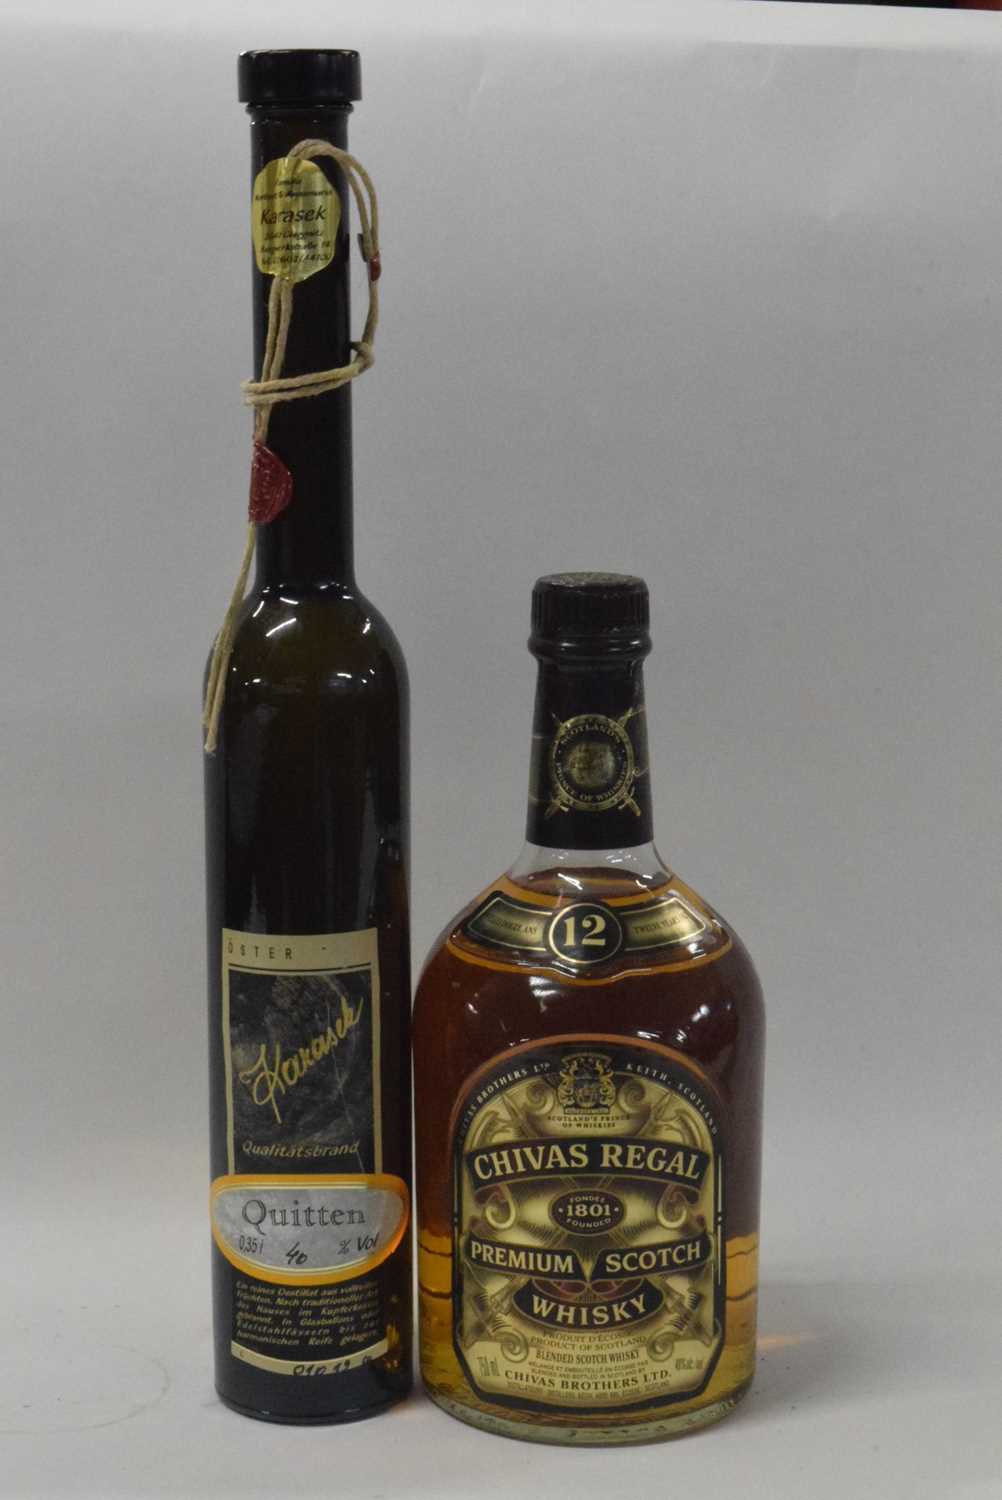 Chivas Regal 12 years old Premium Scotch Whisky and Karasek Quittenbrand, (2) - Image 2 of 2